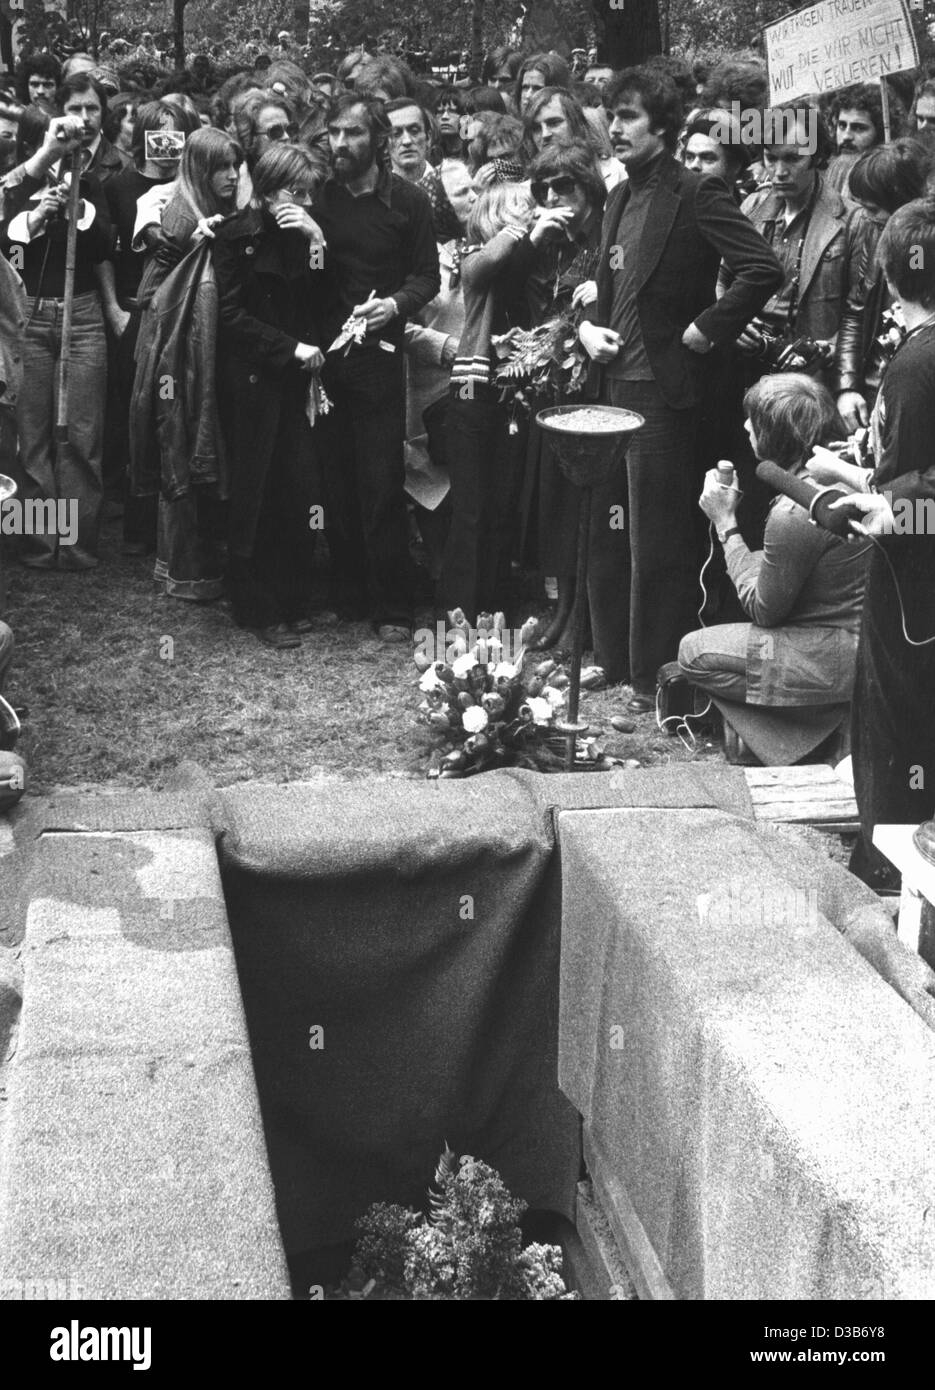 (dpa files) - Relatives and friends mourn among three thousand people at the funeral of RAF terrorist Ulrike Meinhof at the Dreifaltigkeit Cemetery in Berlin, 15 May 1977. In 1970 she participated in the freeing of Andreas Baader, giving birth to the so-called 'Baader-Meinhof Gang.' Meinhof was capt Stock Photo